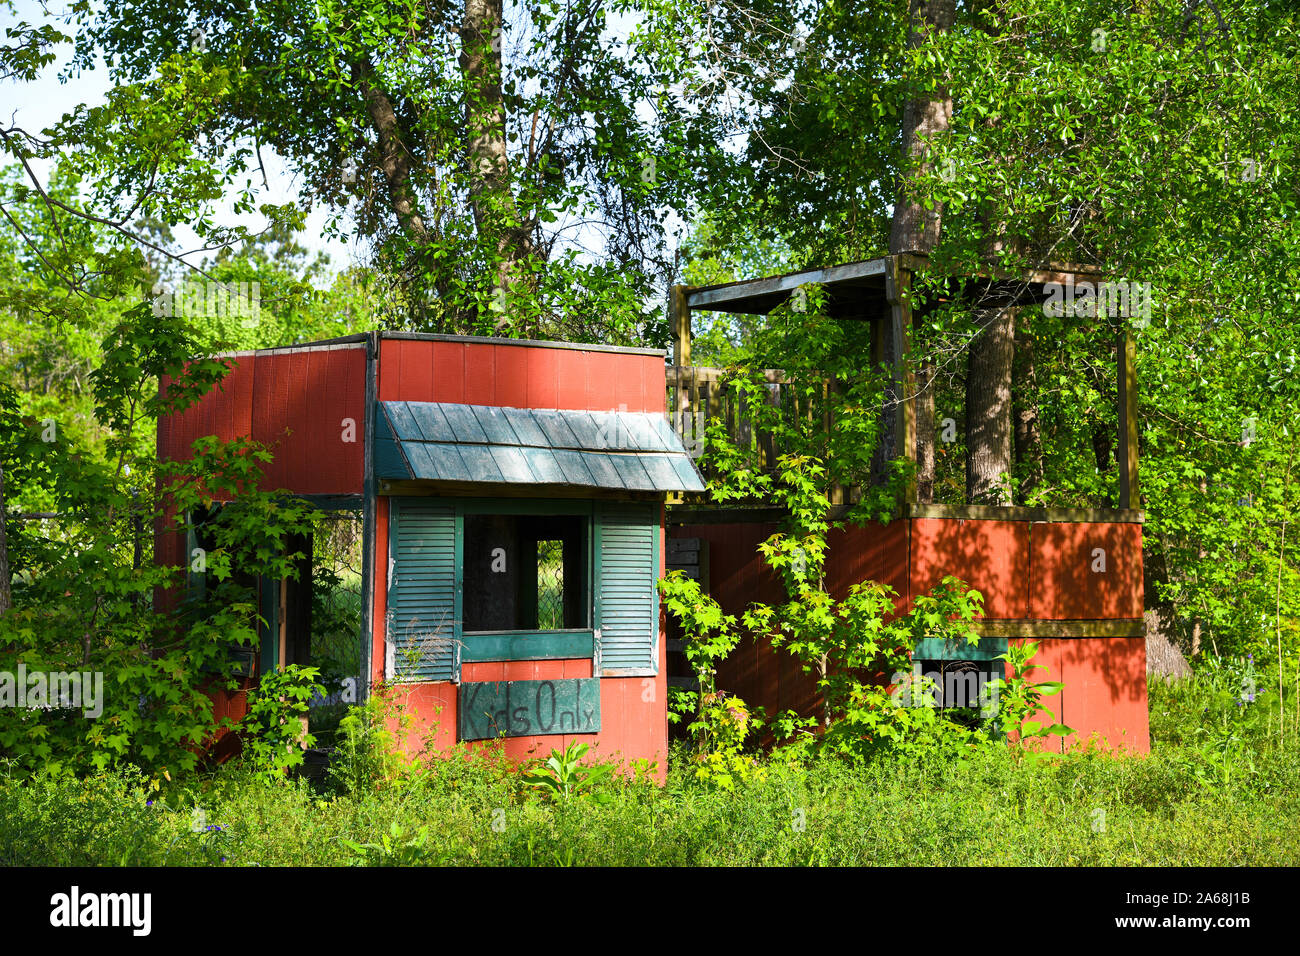 An Old Abandoned Kid's Playhouse sitting in an over grown yard. Stock Photo